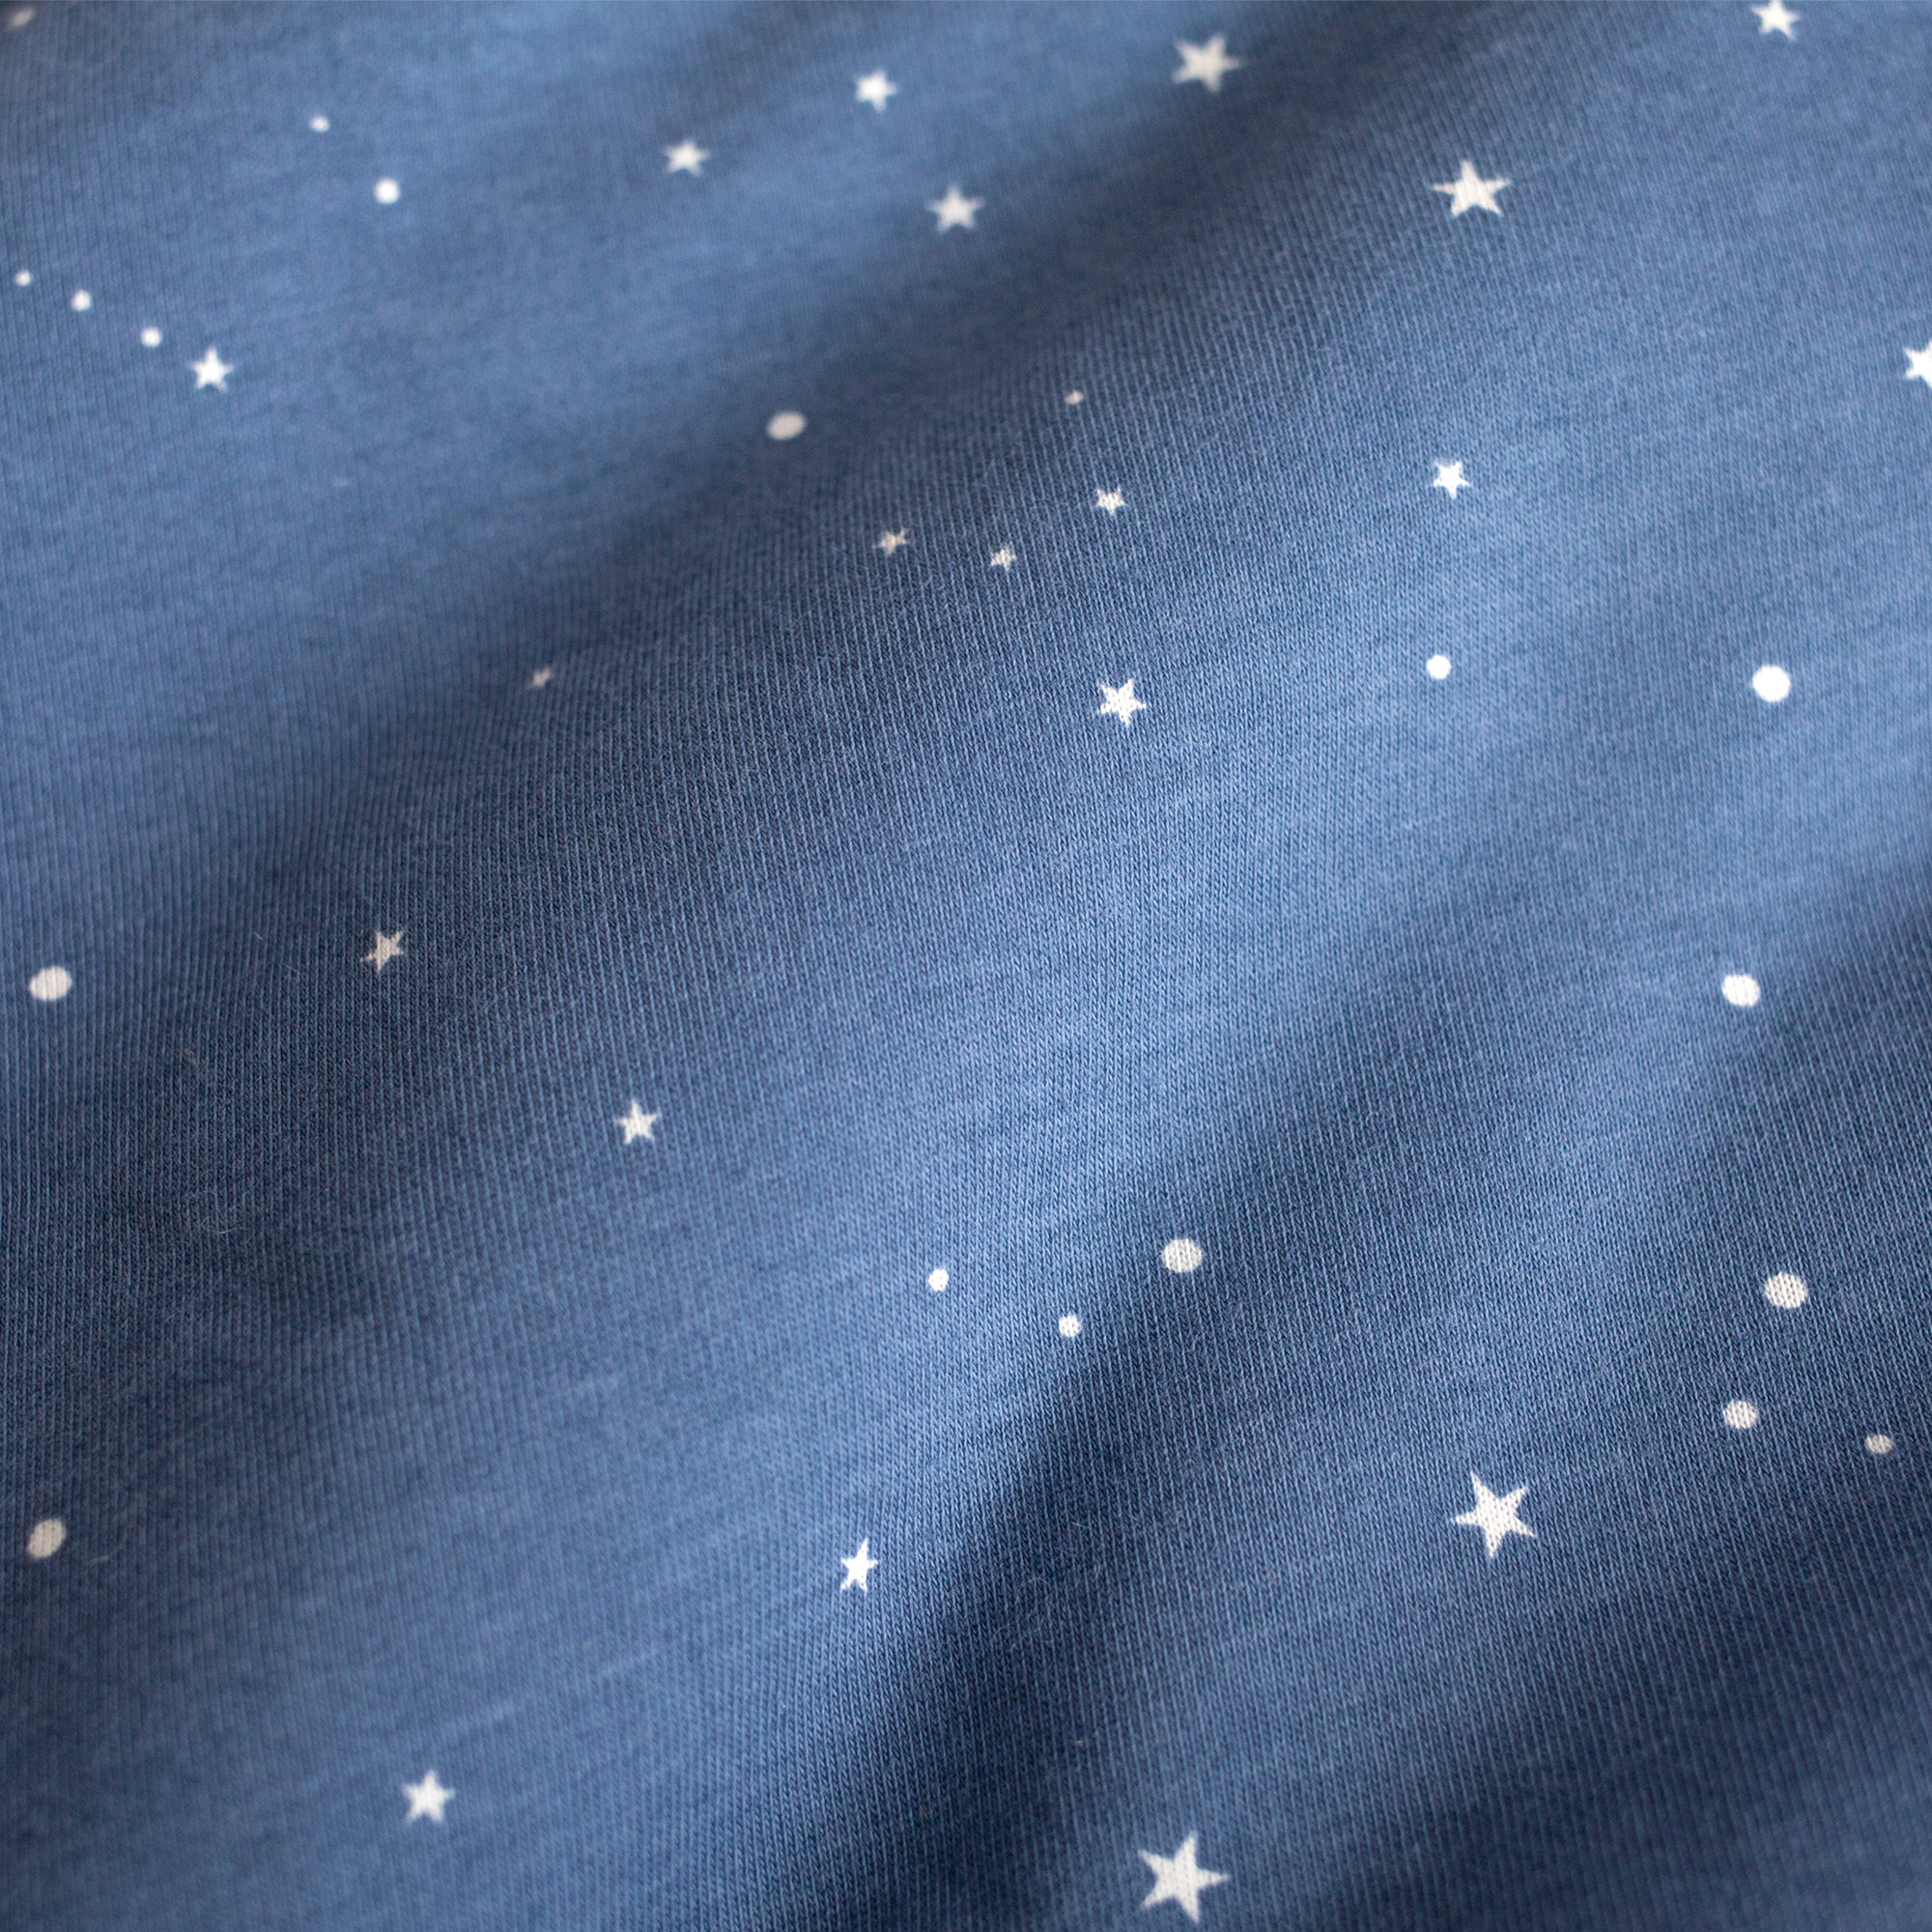 Protector de parque Pady jersey + jersey 100x100x28cm STARY Little stars print shade